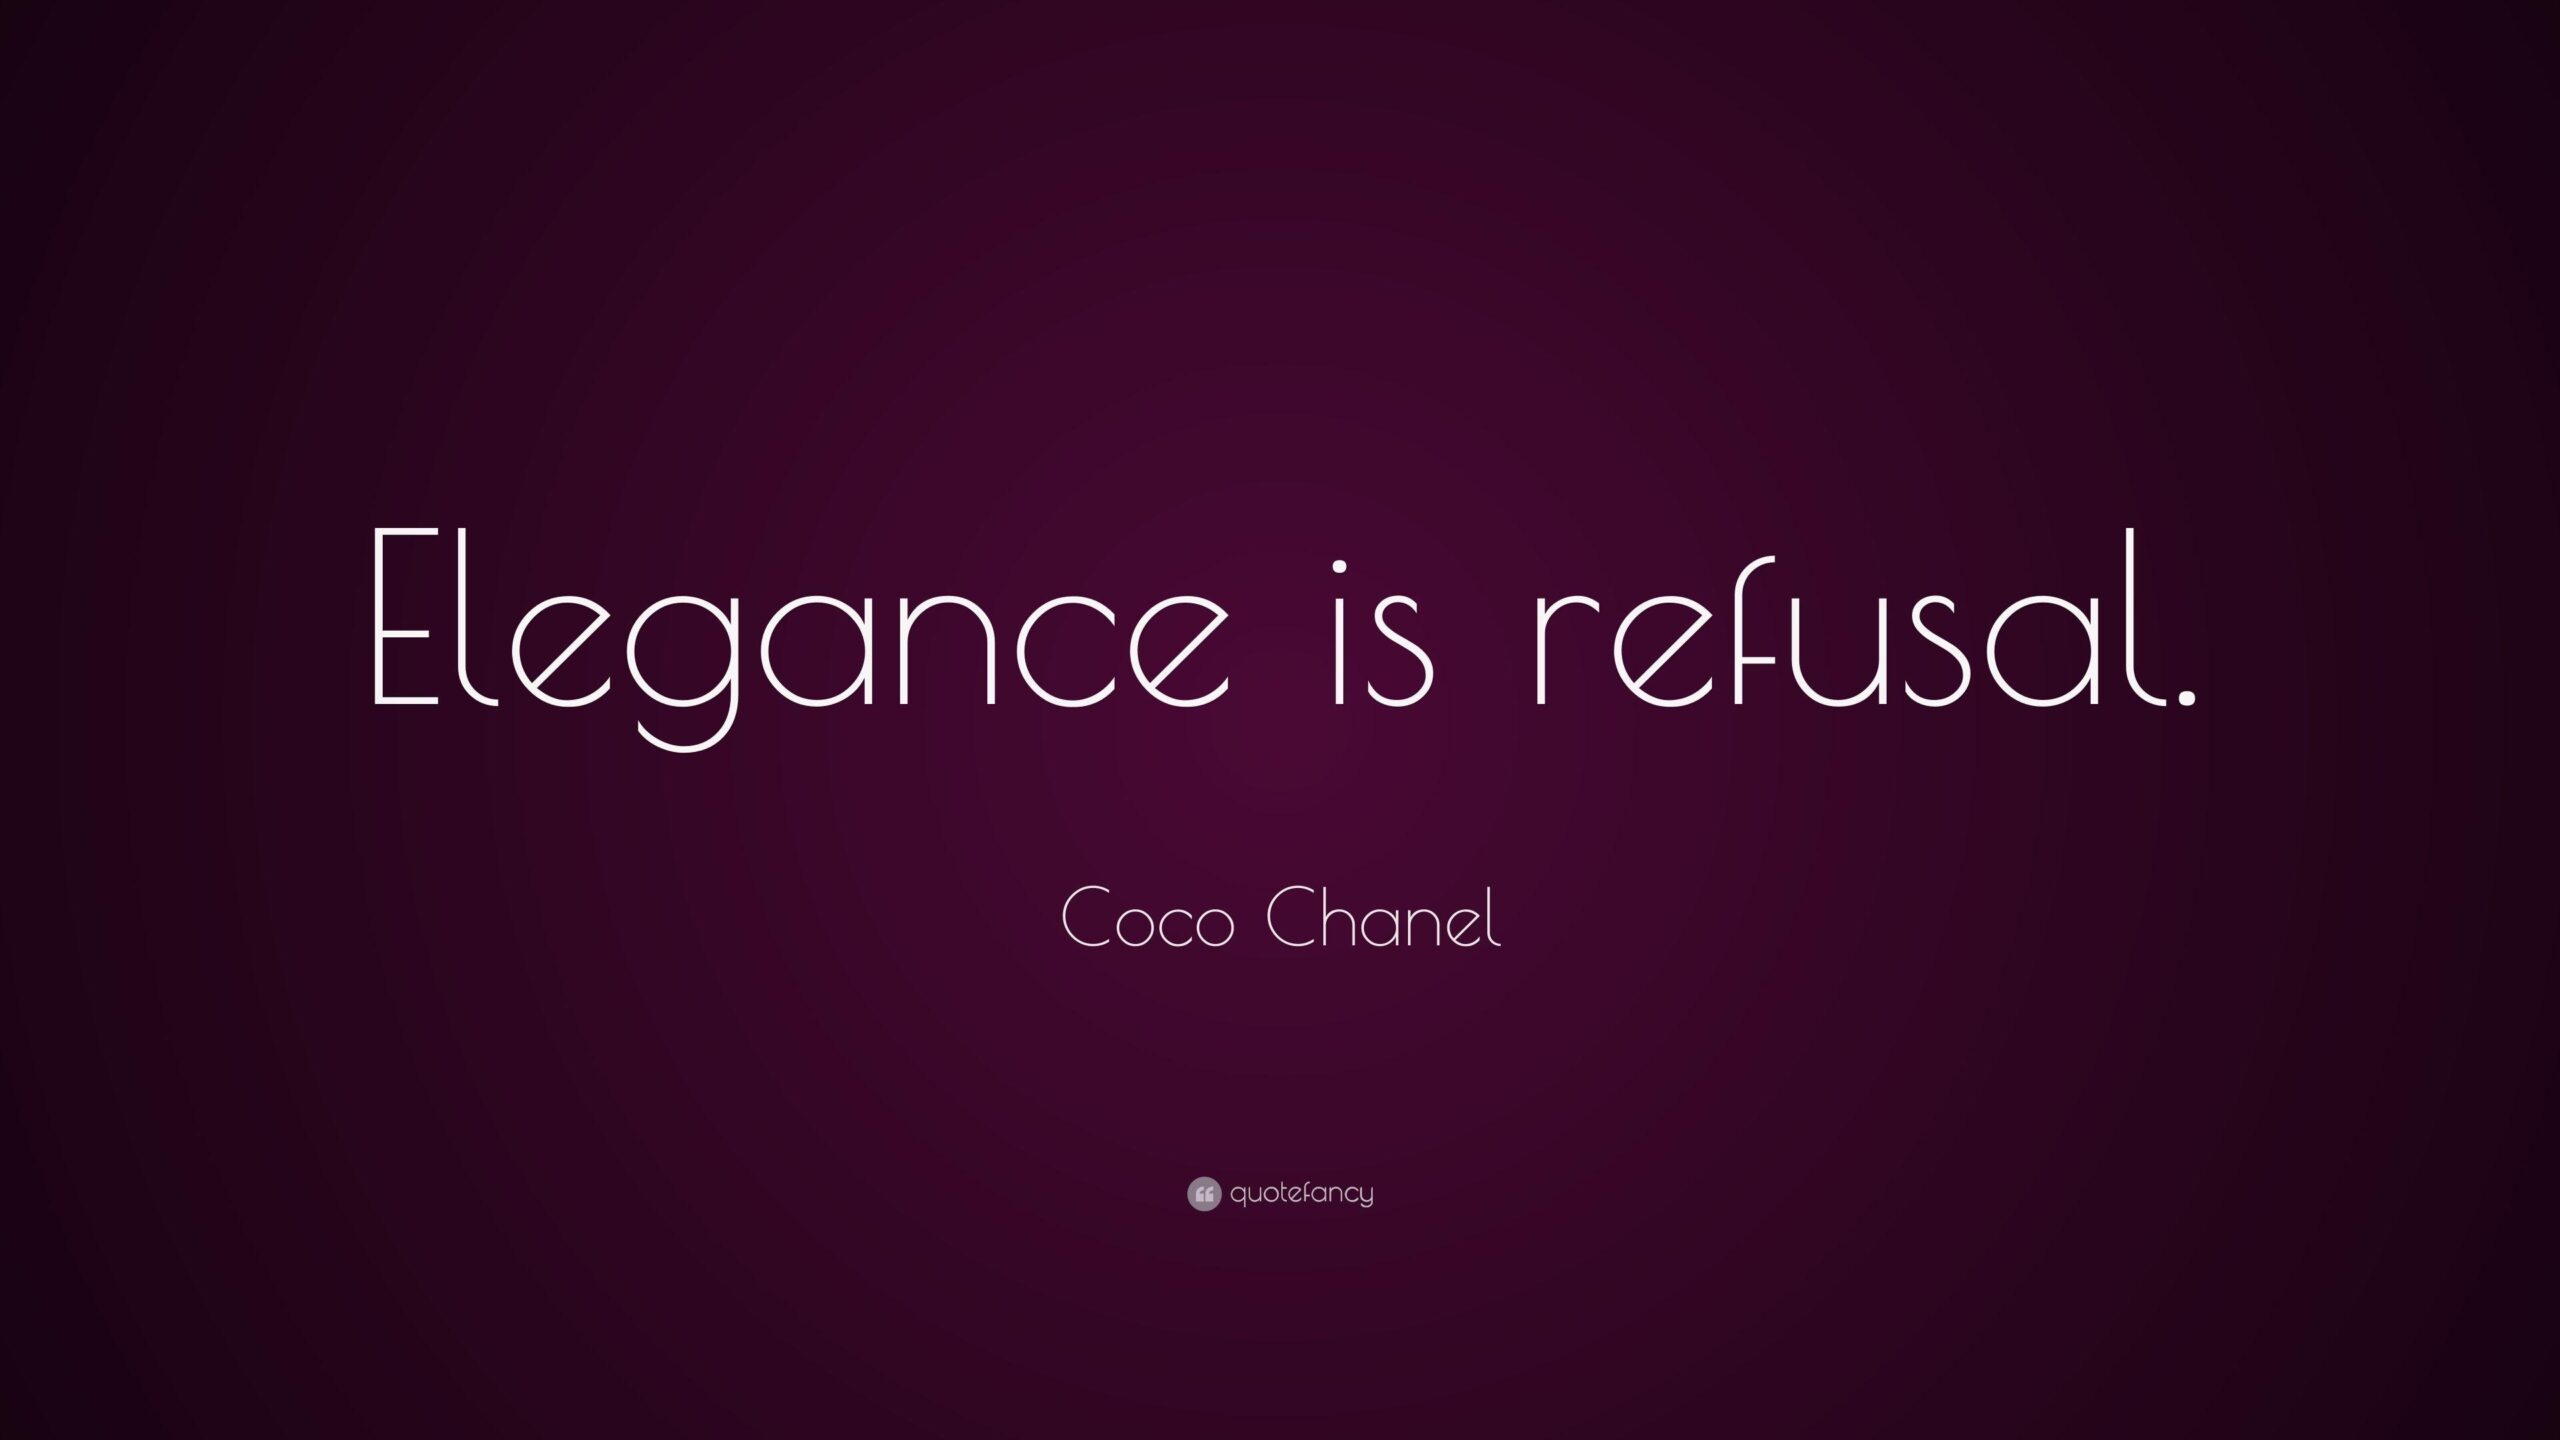 Coco Chanel Quote “Elegance is refusal”